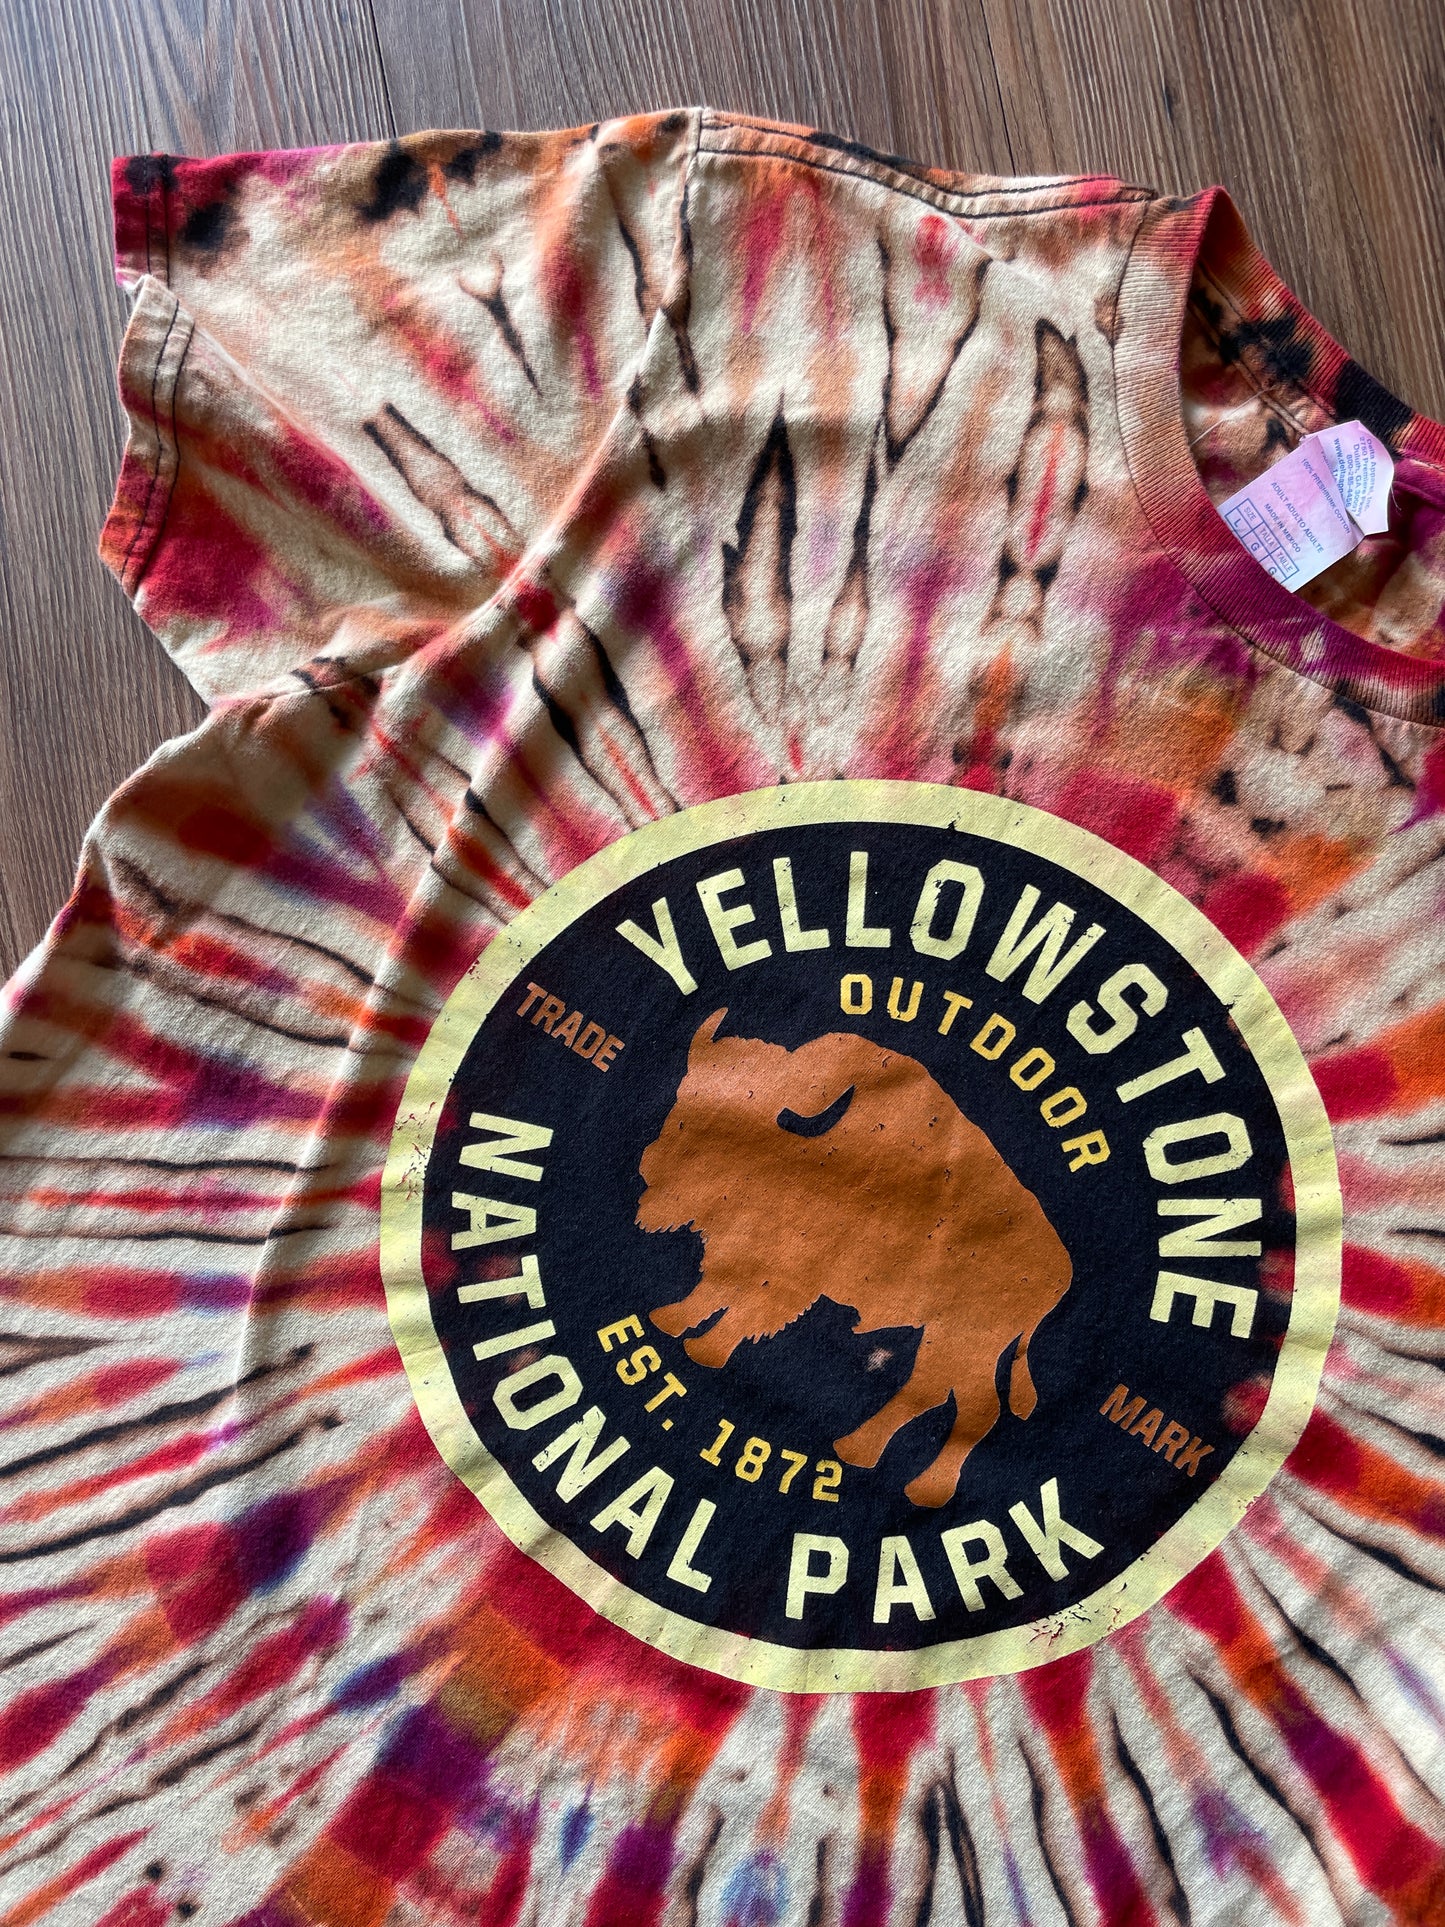 LARGE Men’s Yellowstone National Park Handmade Reverse Tie Dye T-Shirt | One-Of-a-Kind Black and Orange Short Sleeve